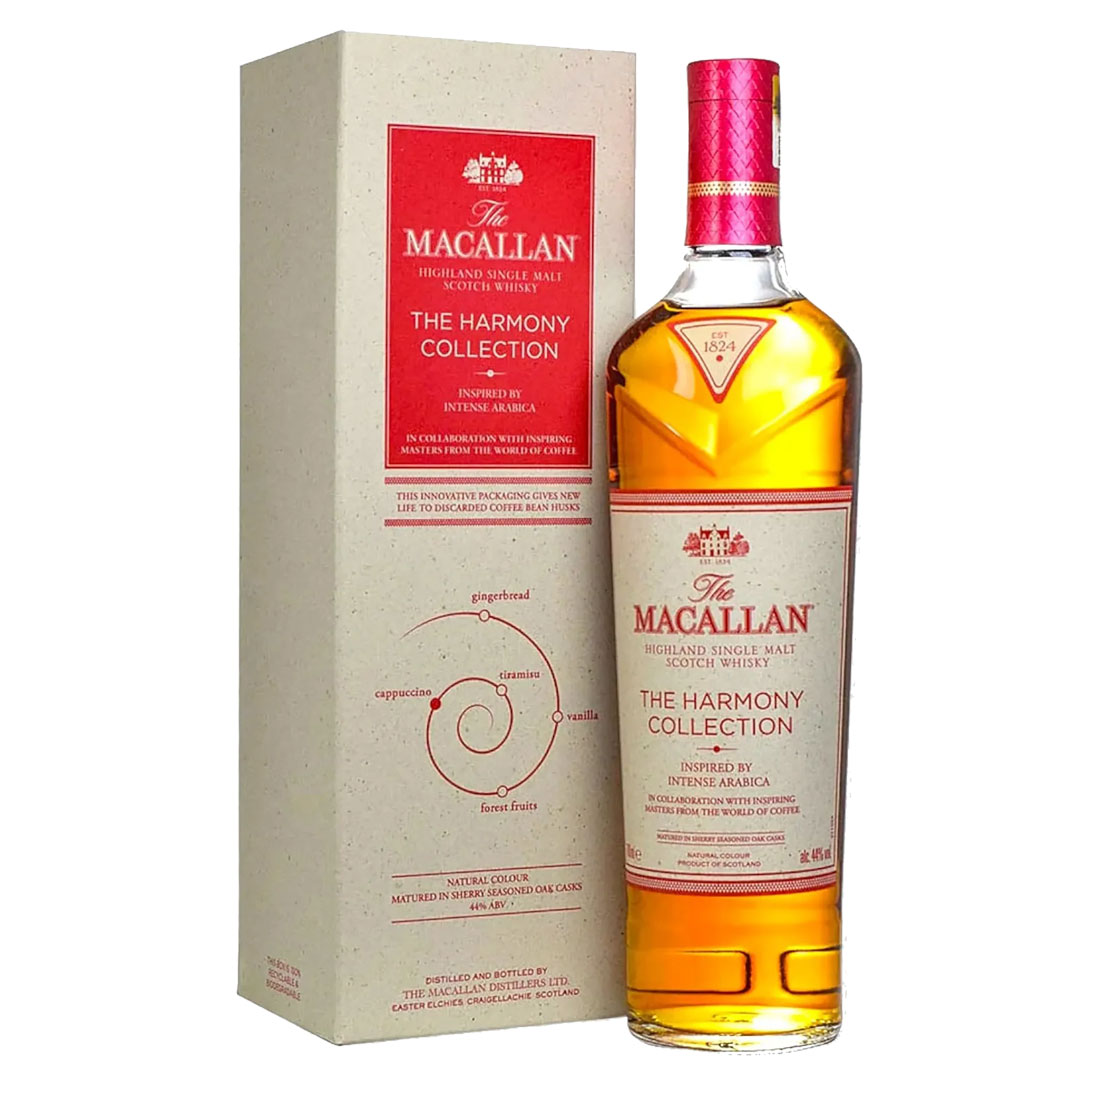 LB_Bottle_The-Macallan-The-Harmony-Collection-2-(Intense-Arabica)